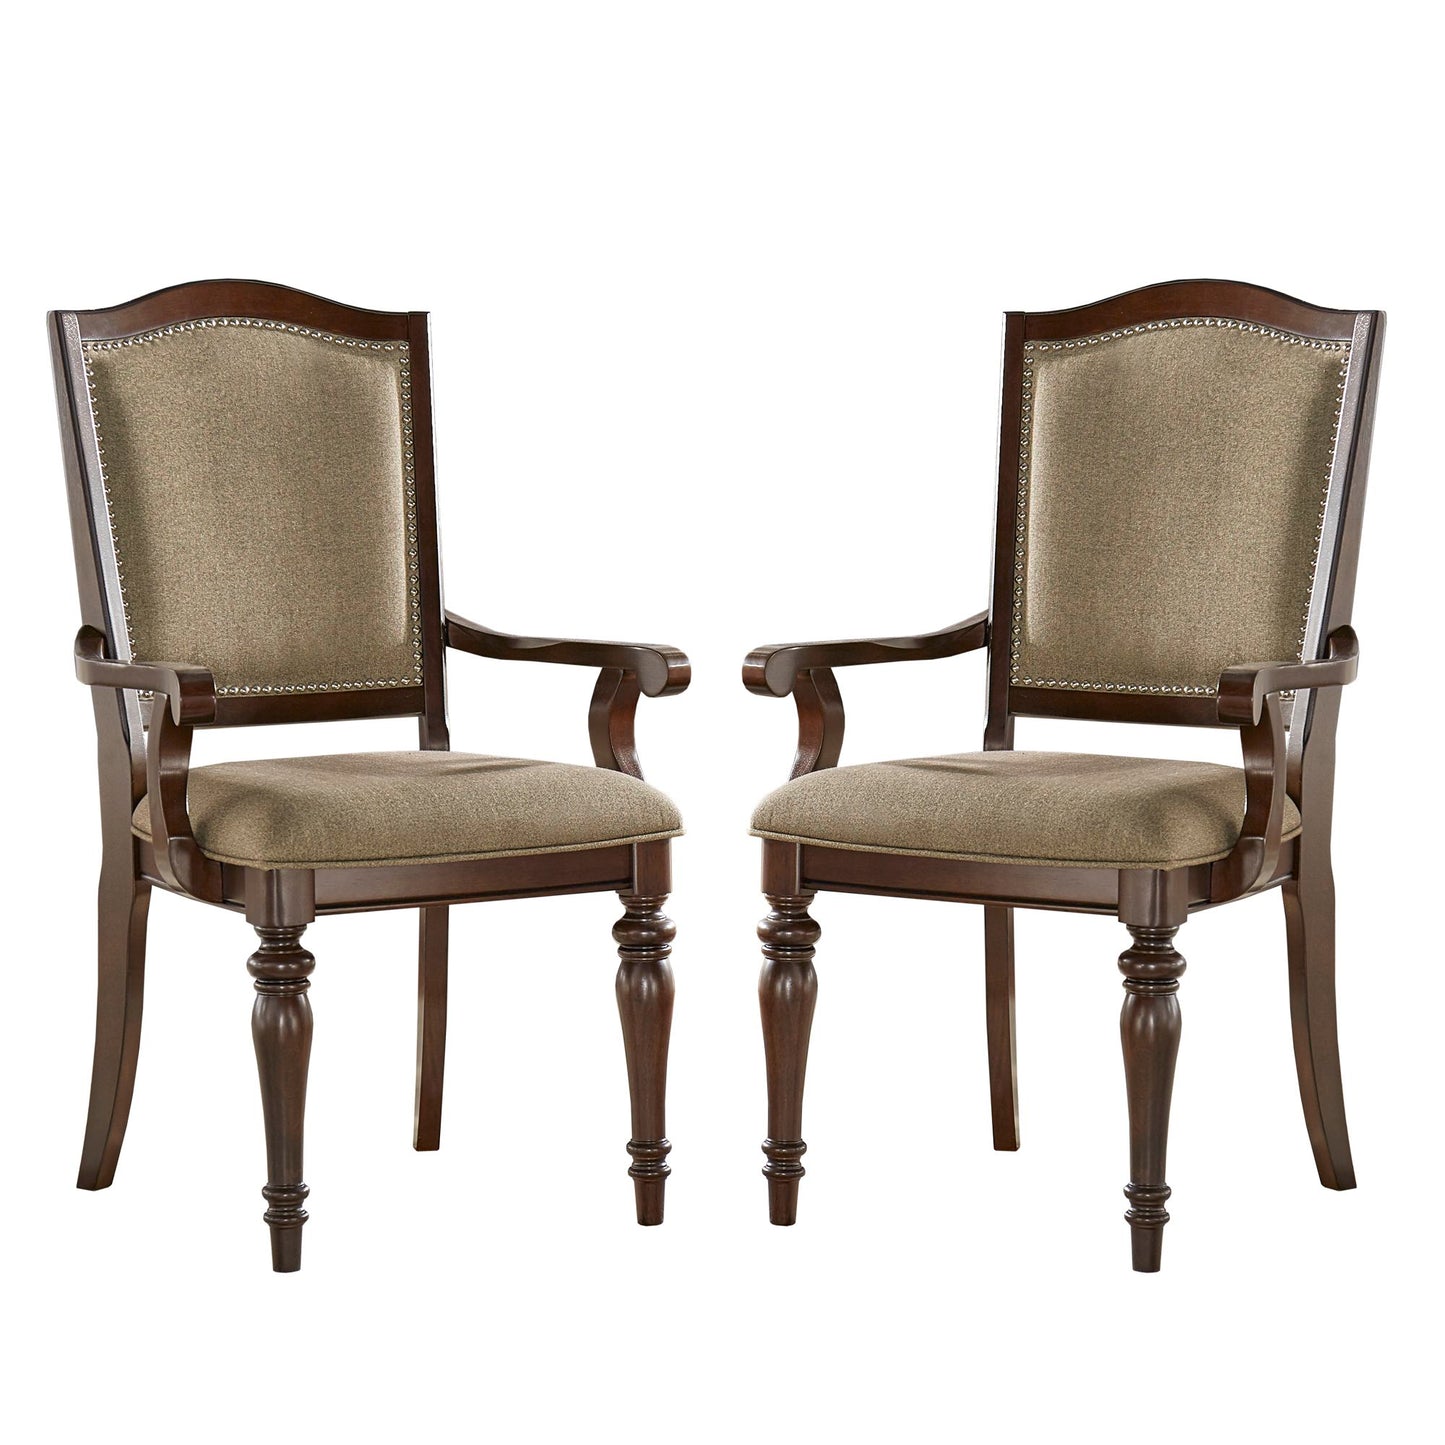 Nailhead Accent Dining Chairs (Set of 2) - Brown Fabric, Arm Chairs